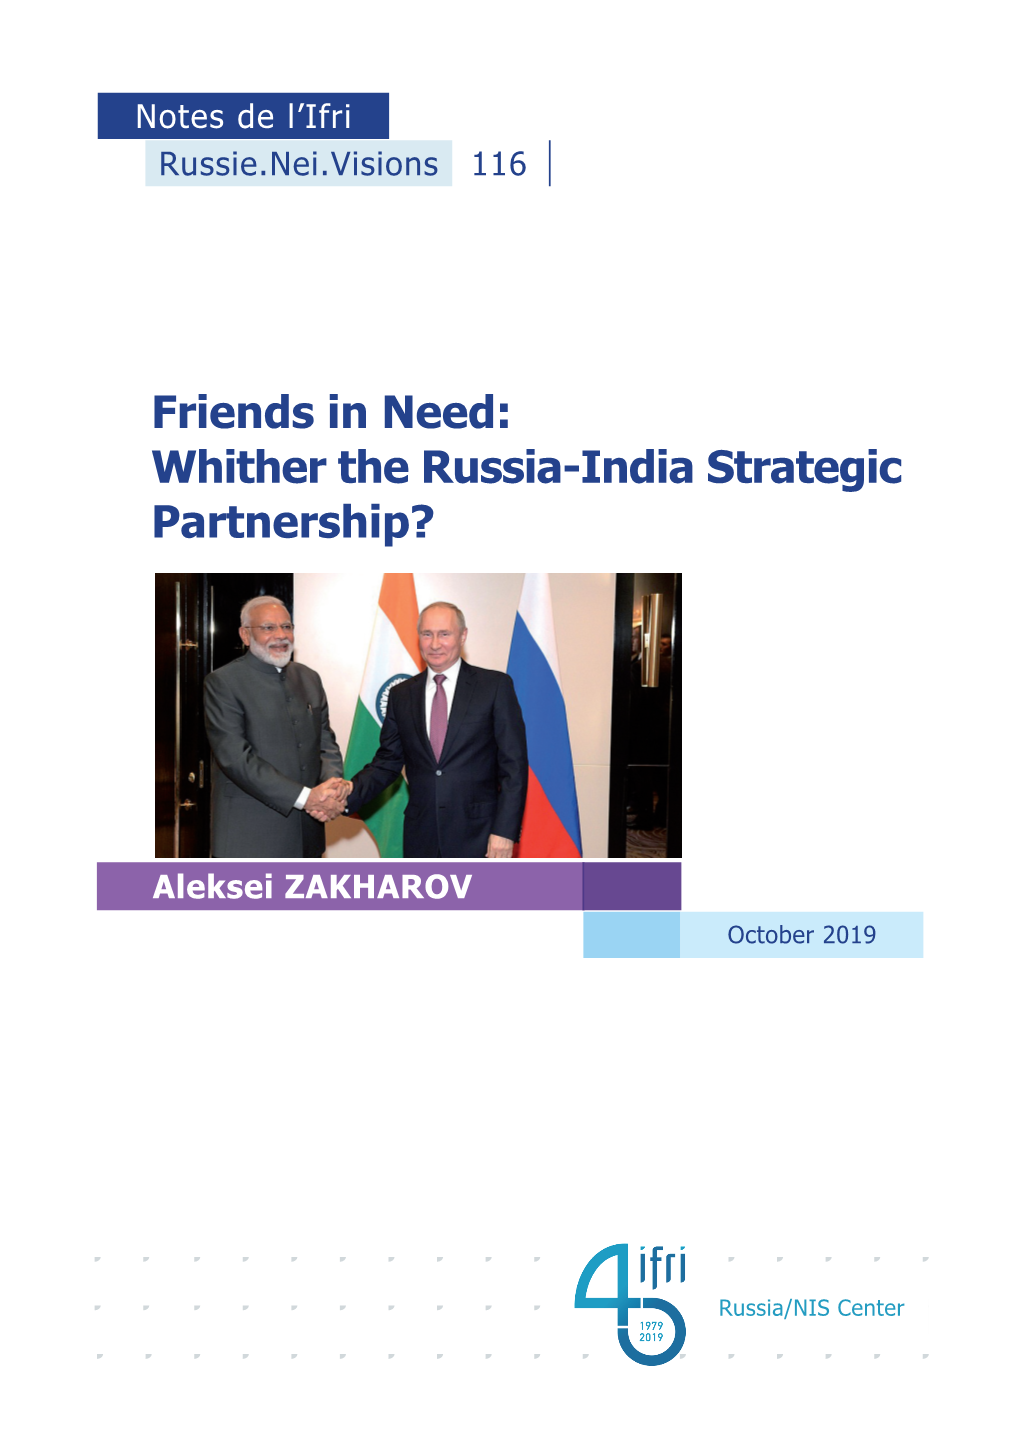 Whither the Russia-India Strategic Partnership?